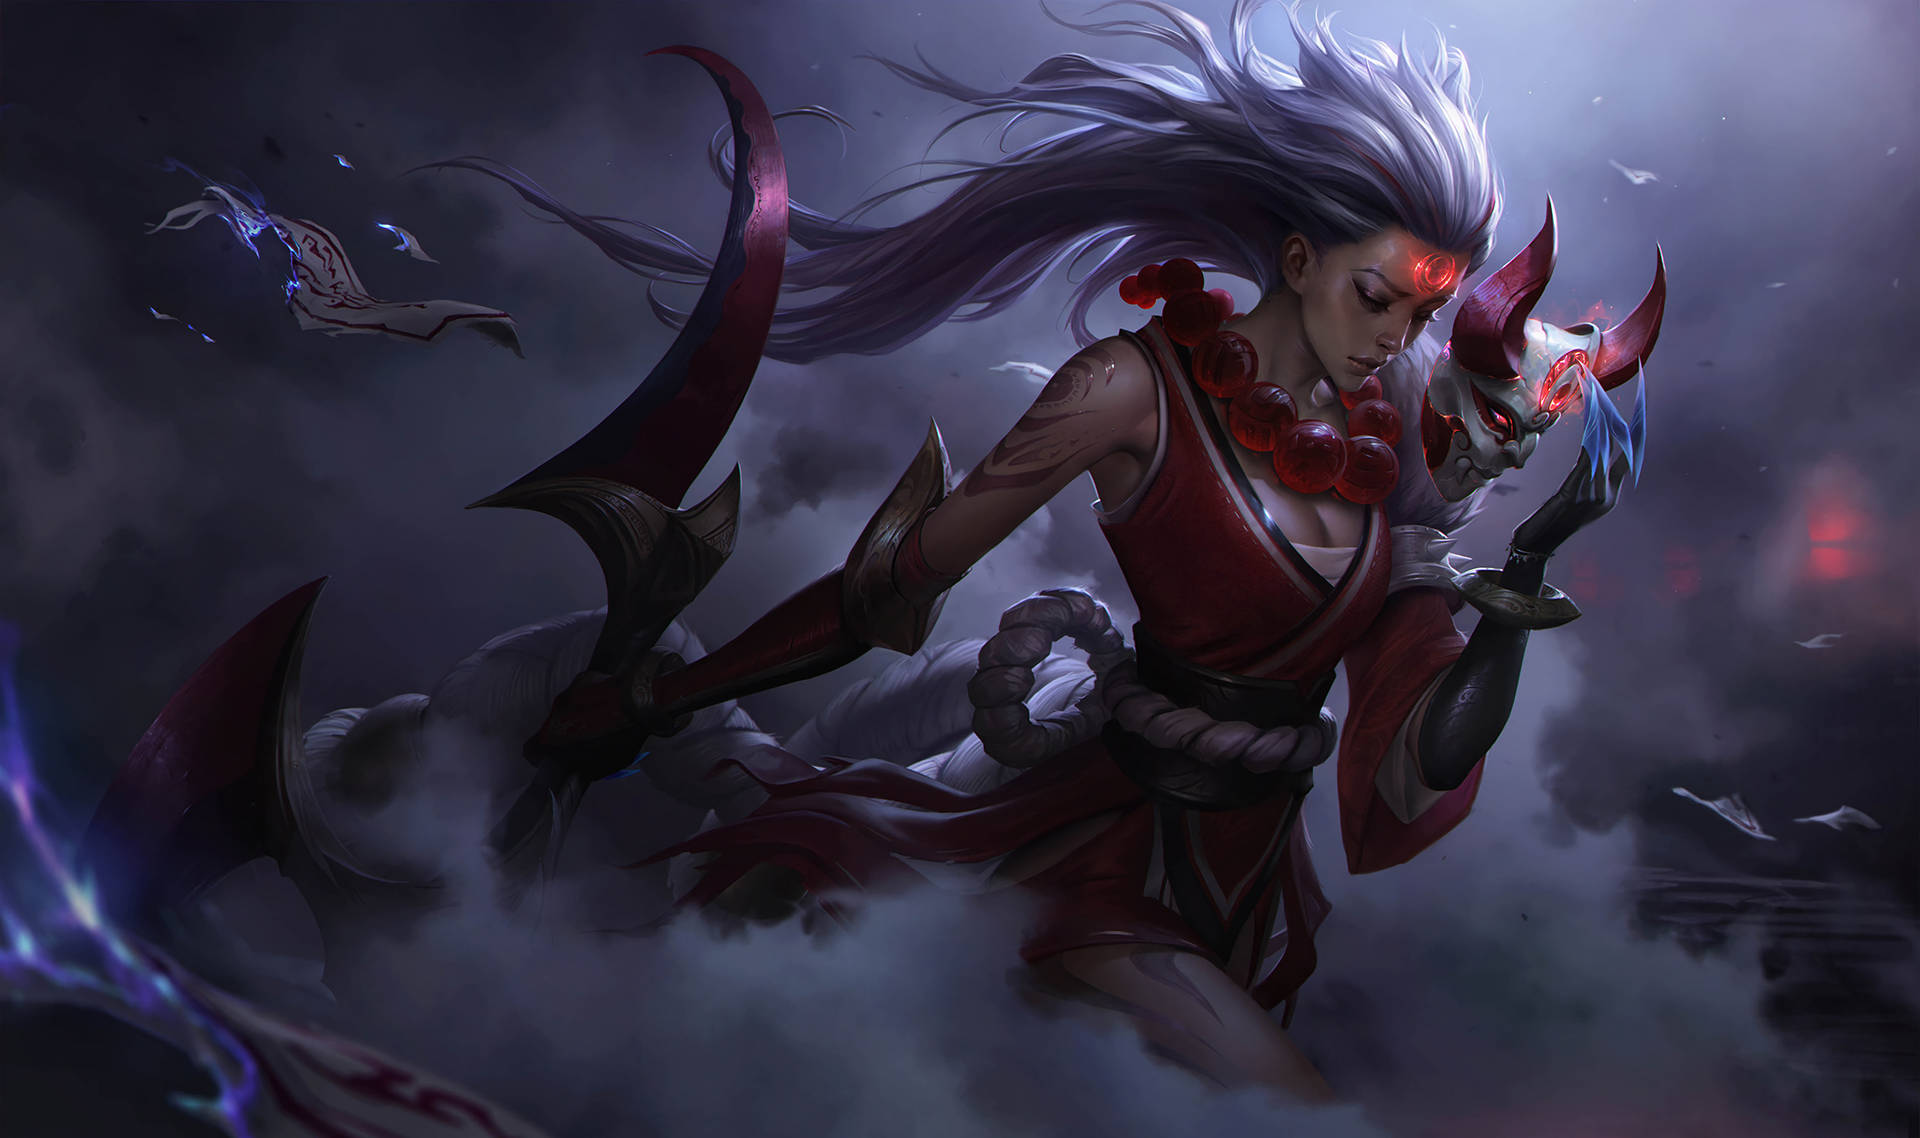 “Diana of the Blood Moon” Wallpaper